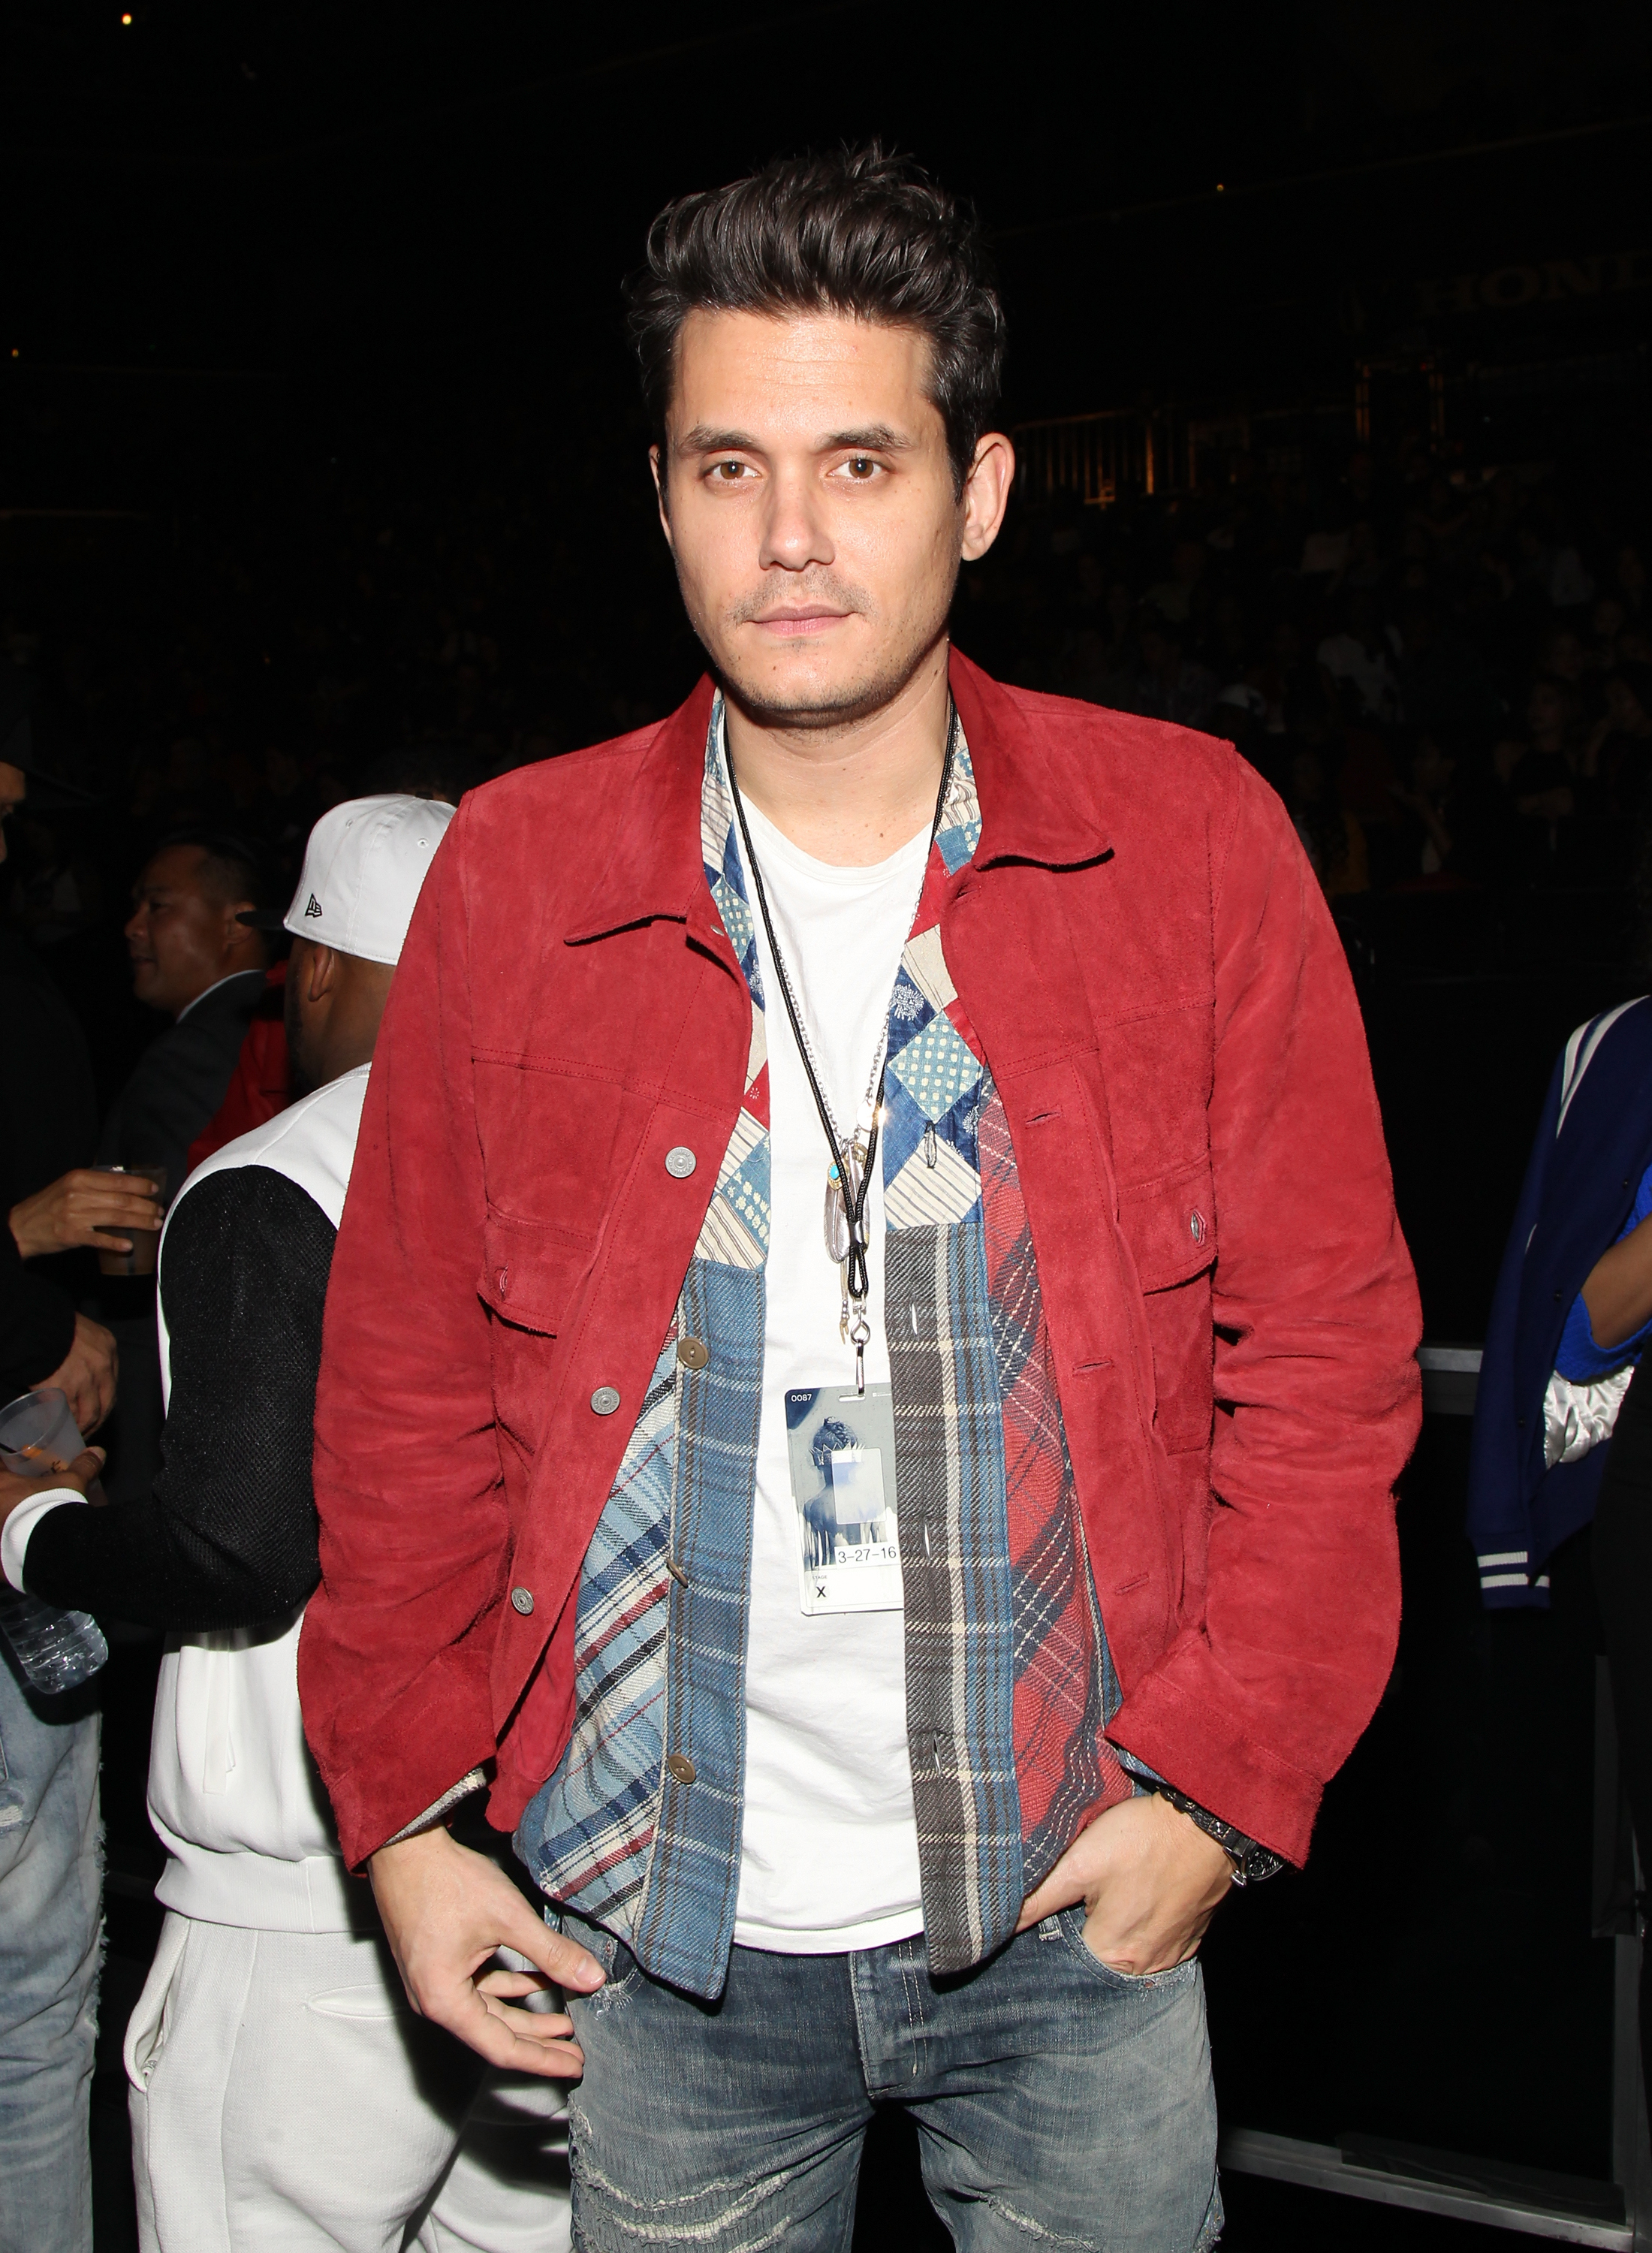 John Mayer Romance Retrospective All The Women He S Dated Gallery Wonderwall Com John mayer is a talented musician who has quite the rep as a ladies man. john mayer romance retrospective all